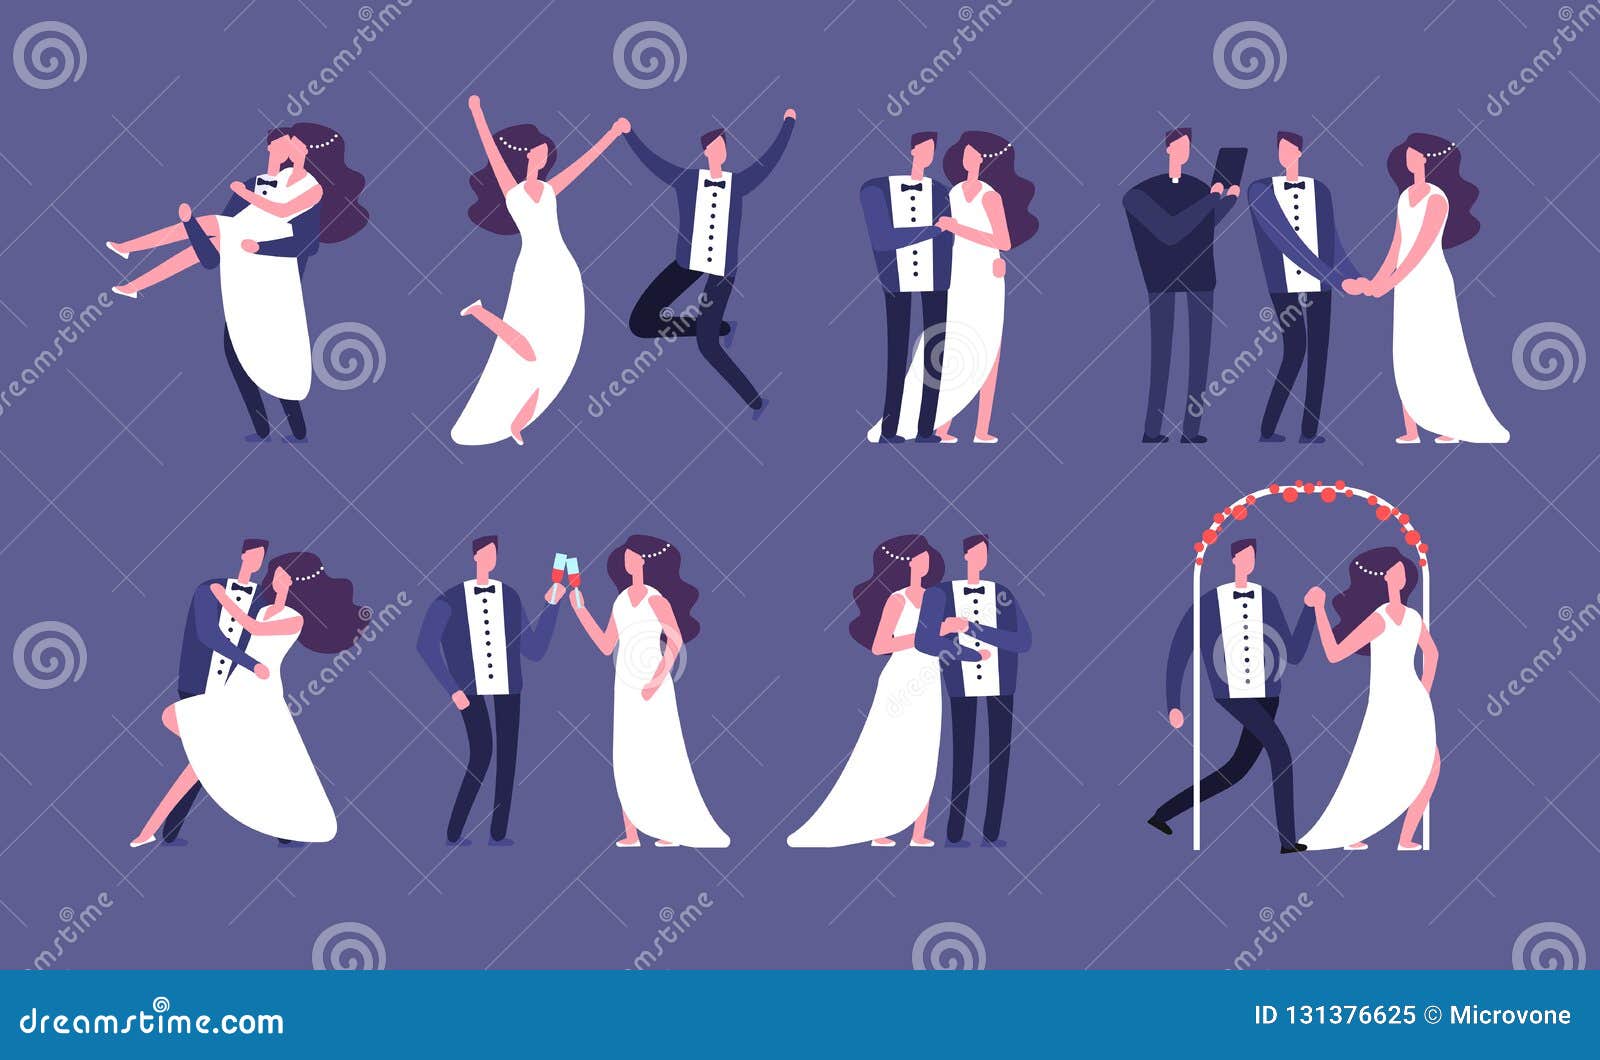 married couples. newly wed bride and groom, wedding celebration cartoon characters. just married happy people  set